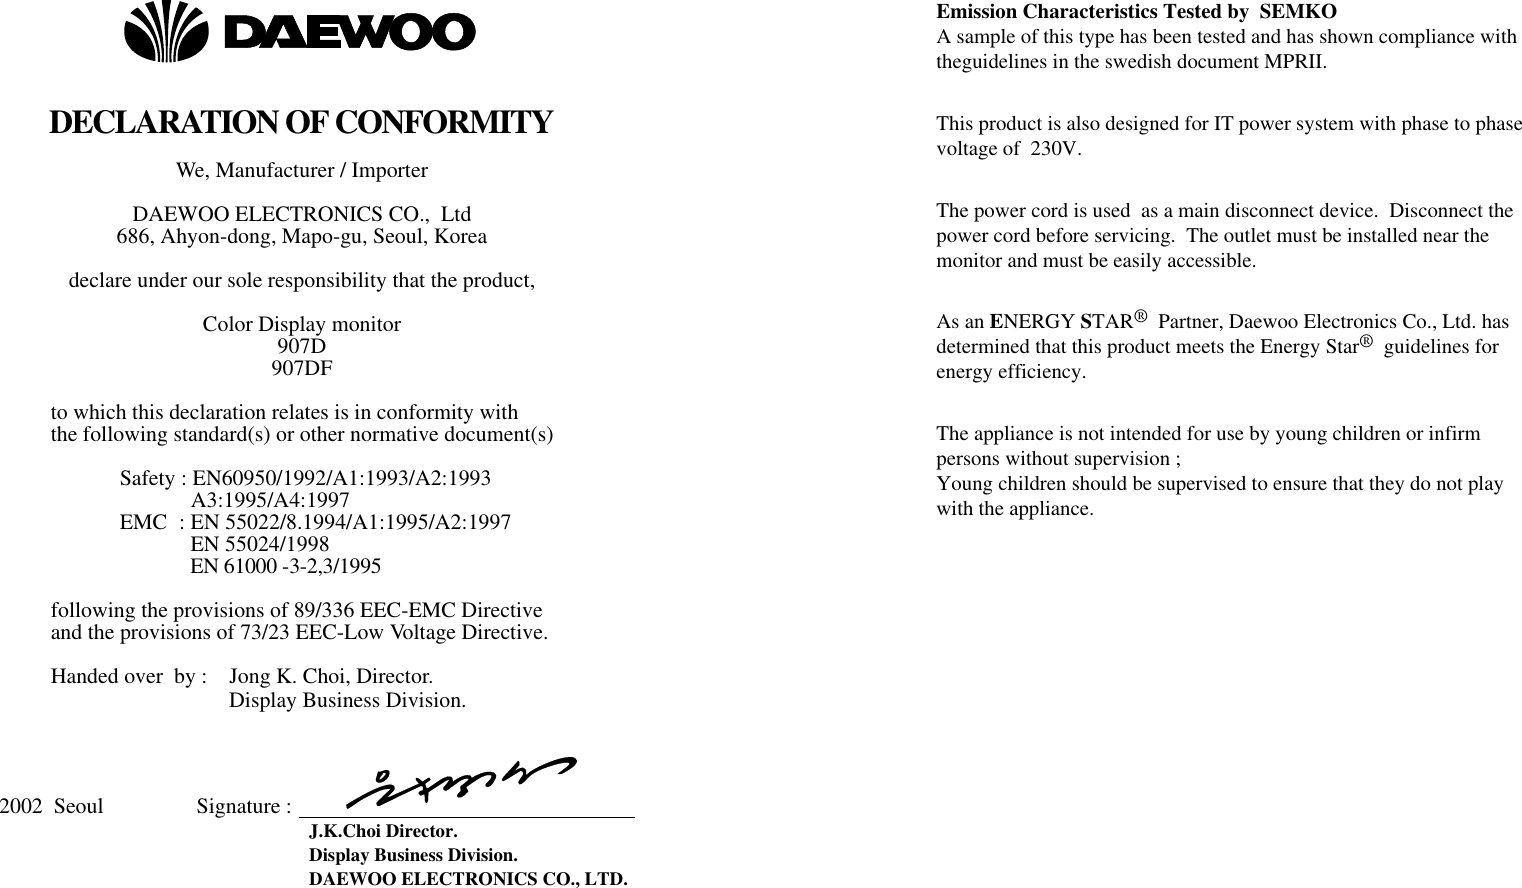 DECLARATION OF CONFORMITYWe, Manufacturer / Importer  DAEWOO ELECTRONICS CO.,  Ltd 686, Ahyon-dong, Mapo-gu, Seoul, Korea  declare under our sole responsibility that the product, Color Display monitor 907D907DFto which this declaration relates is in conformity with the following standard(s) or other normative document(s) Safety : EN60950/1992/A1:1993/A2:1993 A3:1995/A4:1997EMC  : EN 55022/8.1994/A1:1995/A2:1997EN 55024/1998EN 61000 -3-2,3/1995following the provisions of 89/336 EEC-EMC Directive and the provisions of 73/23 EEC-Low Voltage Directive.  Handed over  by :    Jong K. Choi, Director. Display Business Division. 2002  Seoul                 Signature :  J.K.Choi Director. Display Business Division.  DAEWOO ELECTRONICS CO., LTD.  Emission Characteristics Tested by  SEMKOA sample of this type has been tested and has shown compliance withtheguidelines in the swedish document MPRII.This product is also designed for IT power system with phase to phasevoltage of  230V. The power cord is used  as a main disconnect device.  Disconnect thepower cord before servicing.  The outlet must be installed near themonitor and must be easily accessible.As an ENERGY STAR®Partner, Daewoo Electronics Co., Ltd. hasdetermined that this product meets the Energy Star®guidelines forenergy efficiency.The appliance is not intended for use by young children or infirmpersons without supervision ;Young children should be supervised to ensure that they do not playwith the appliance.